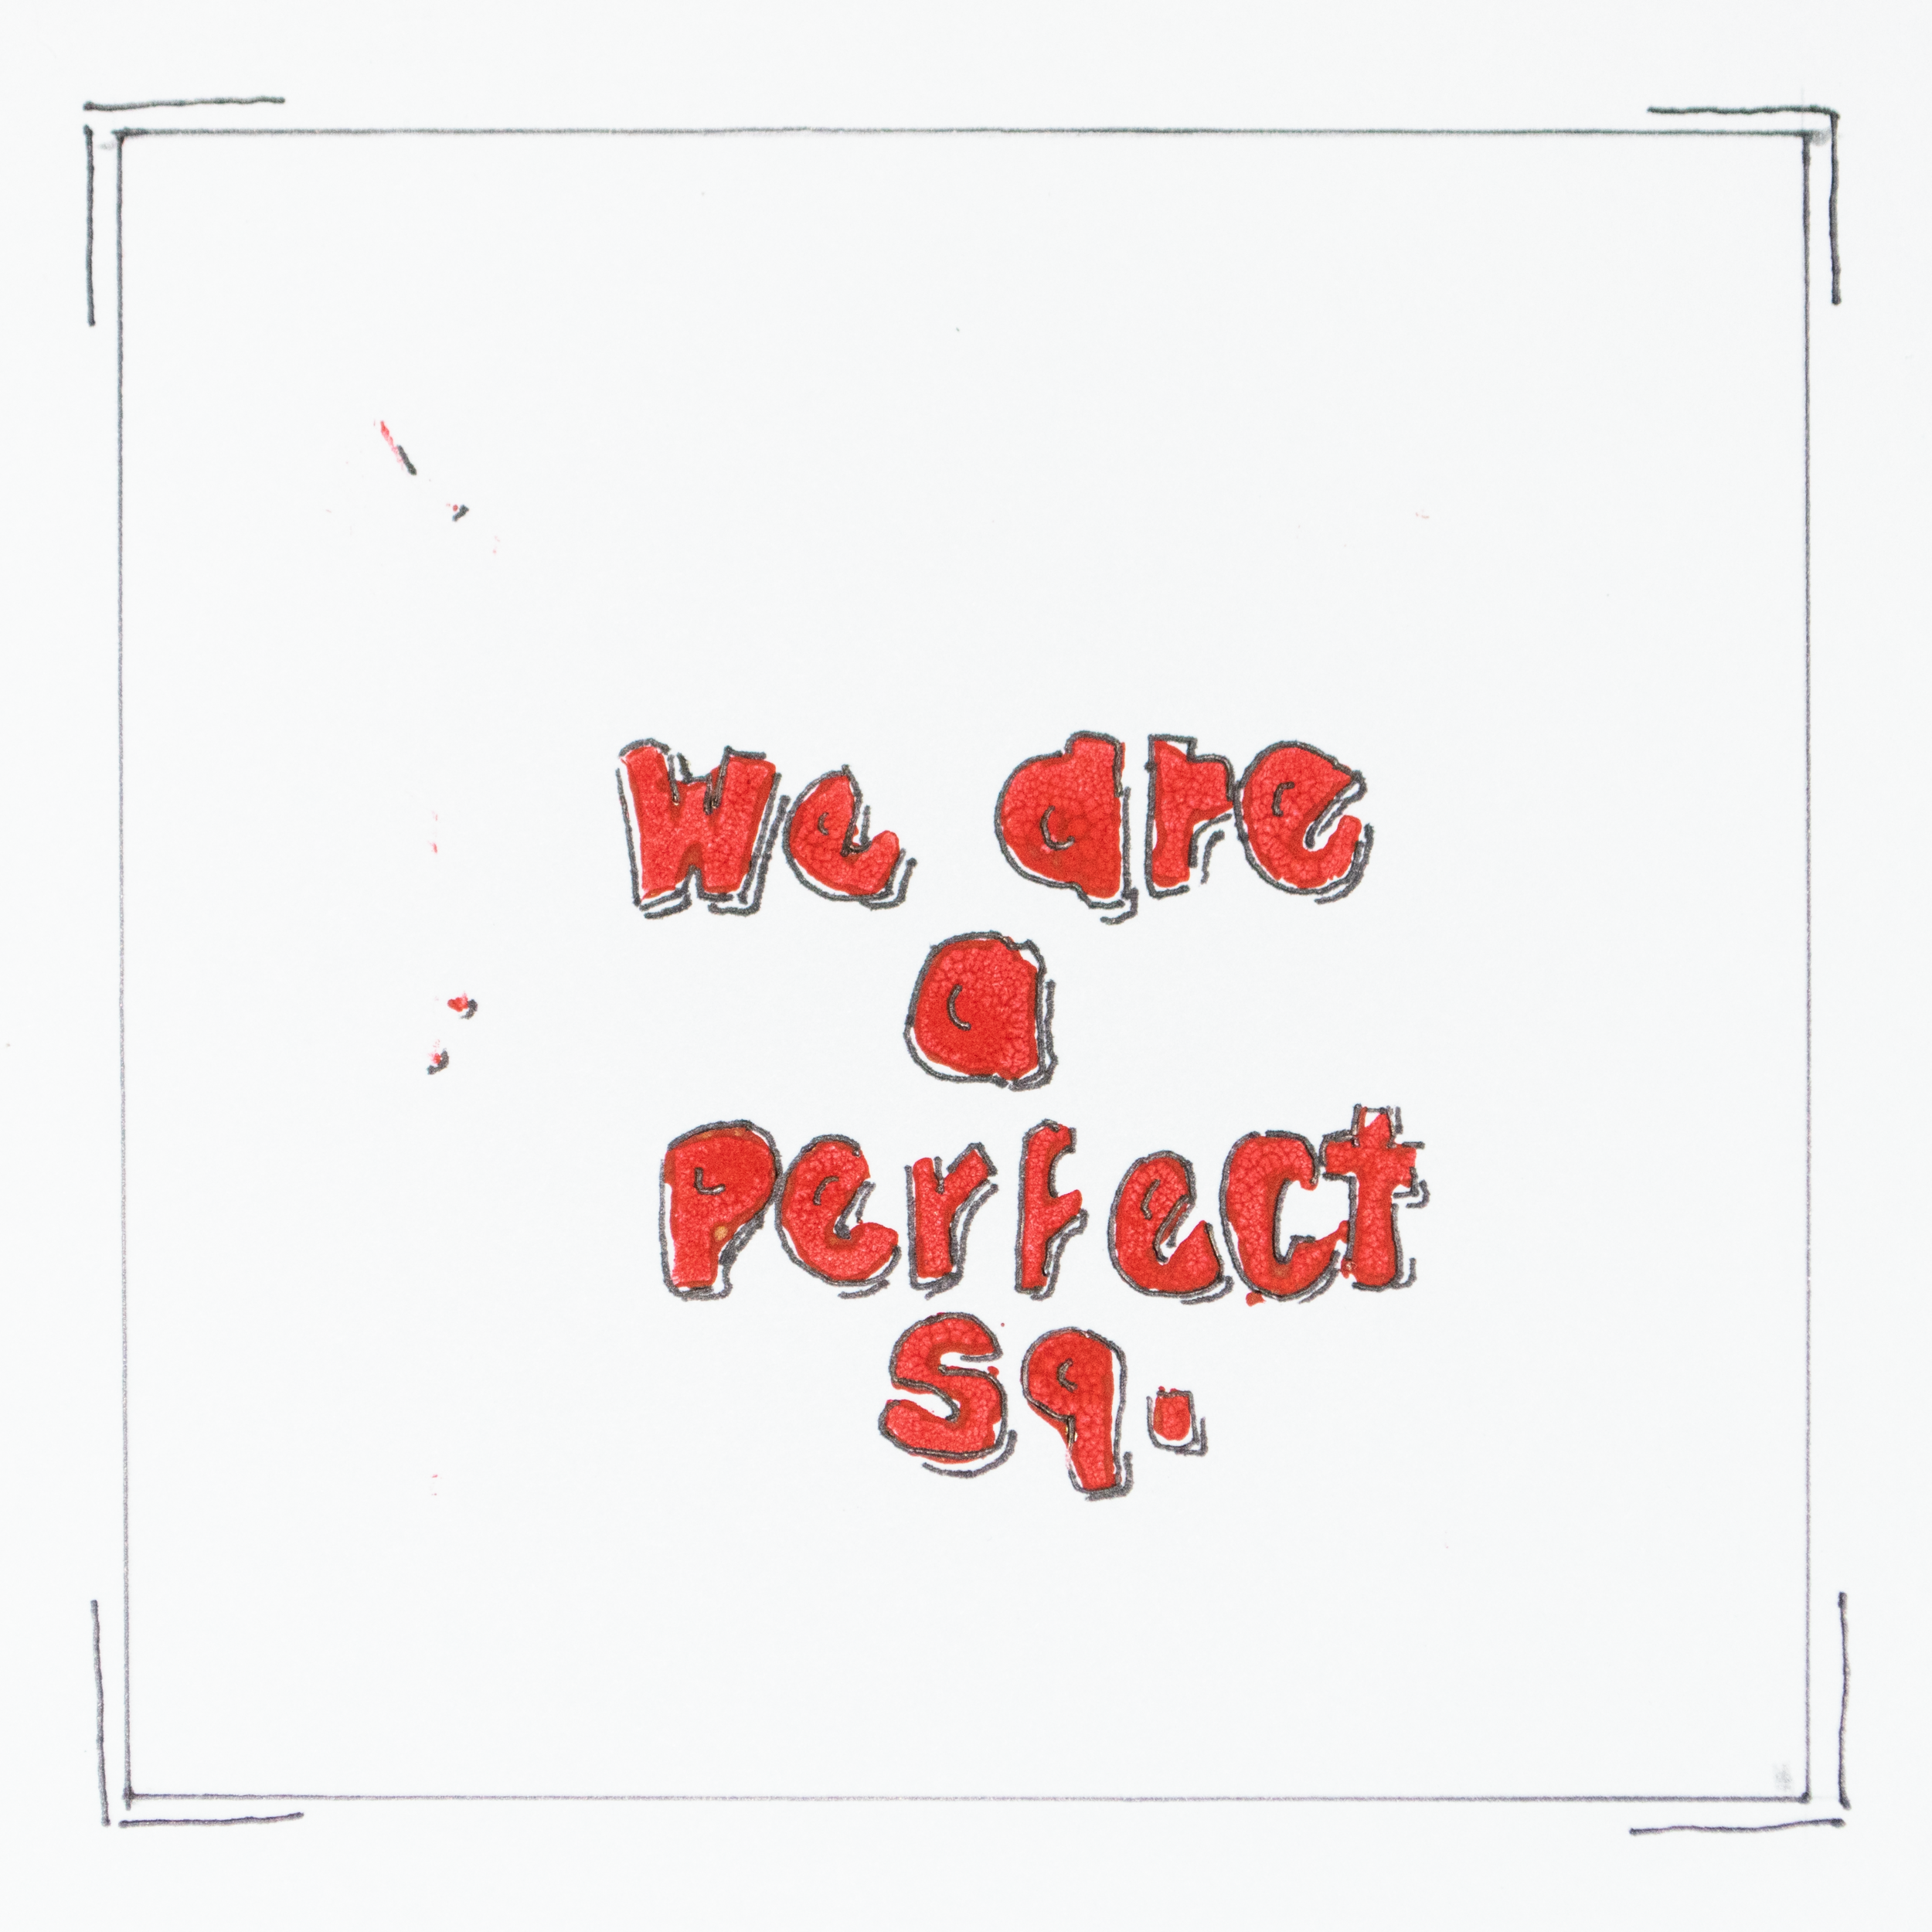 we are a perfect square